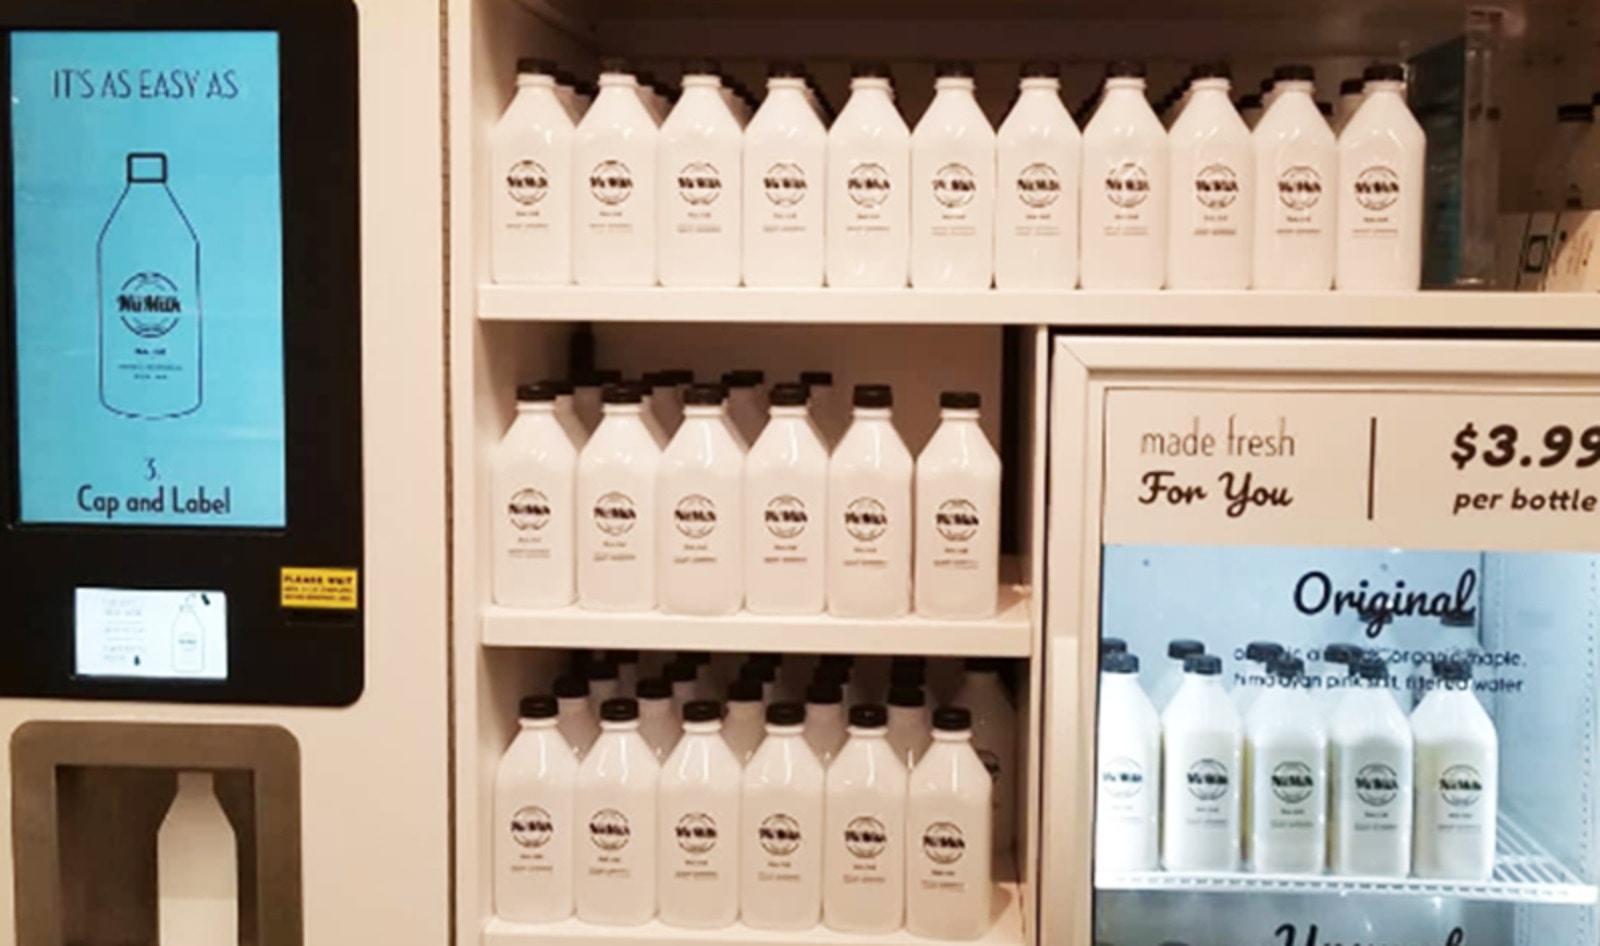 DIY Almond Milk Machines Now at Select Whole Foods